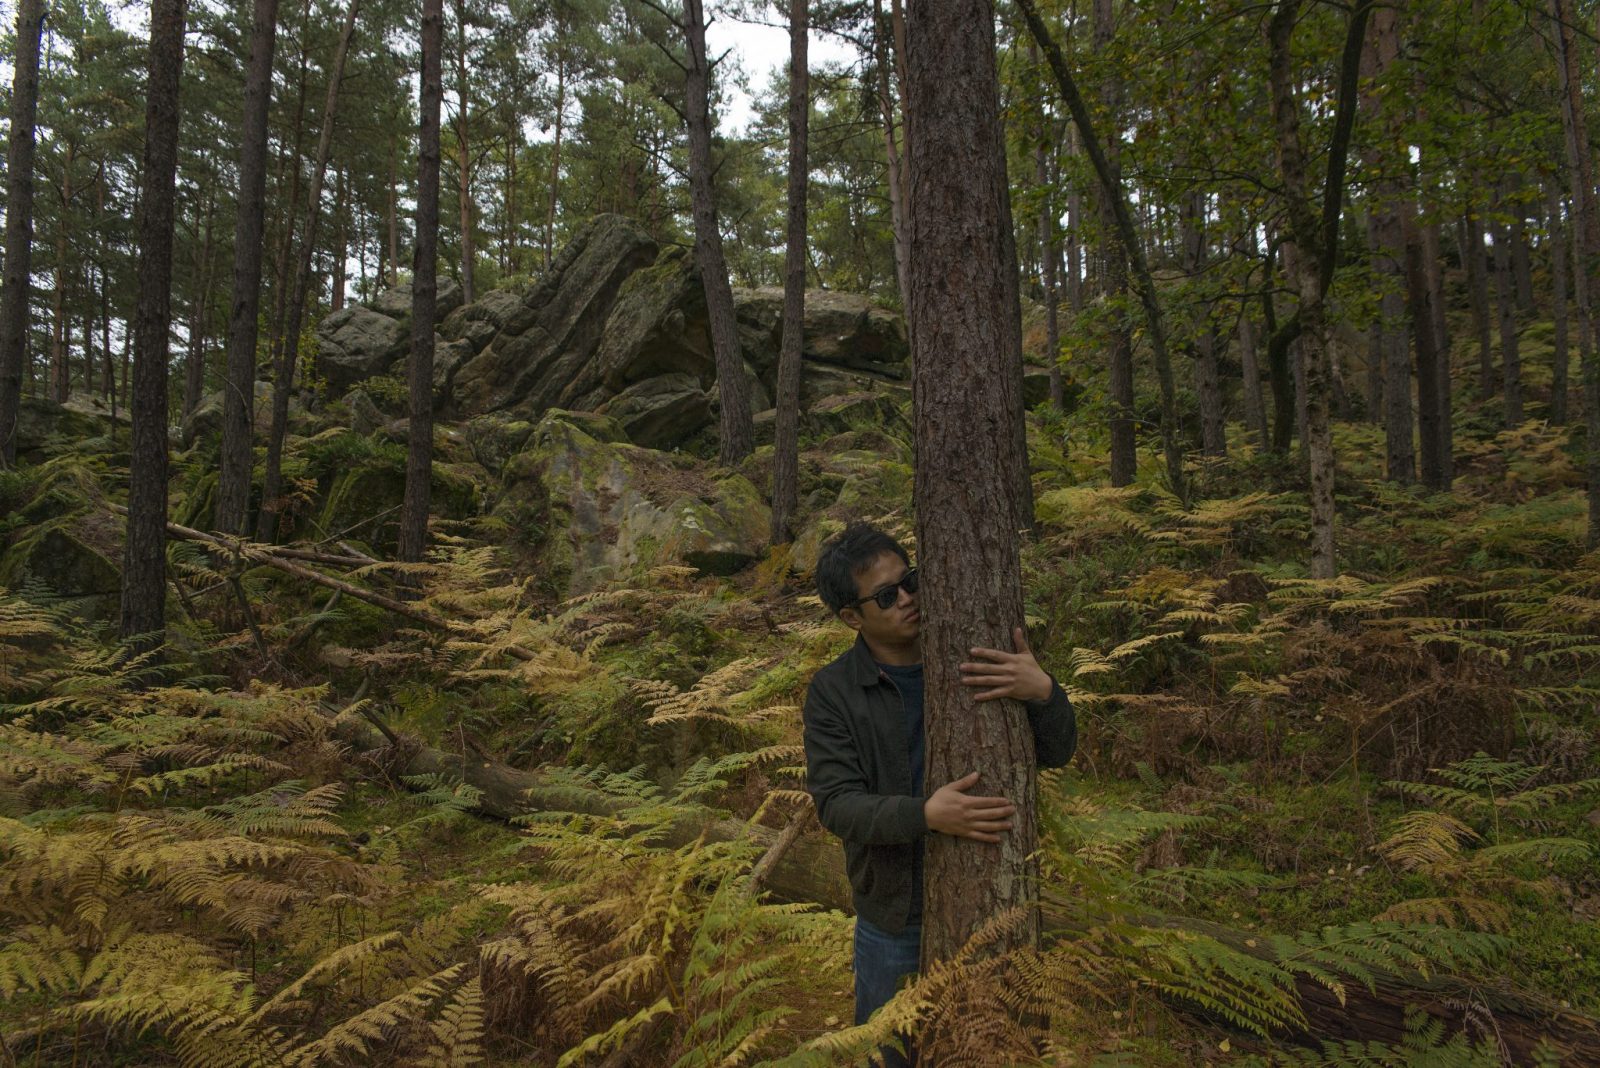 Etienne, tree hugger, and his pine hugged tree (Fontainebleau, 2017)